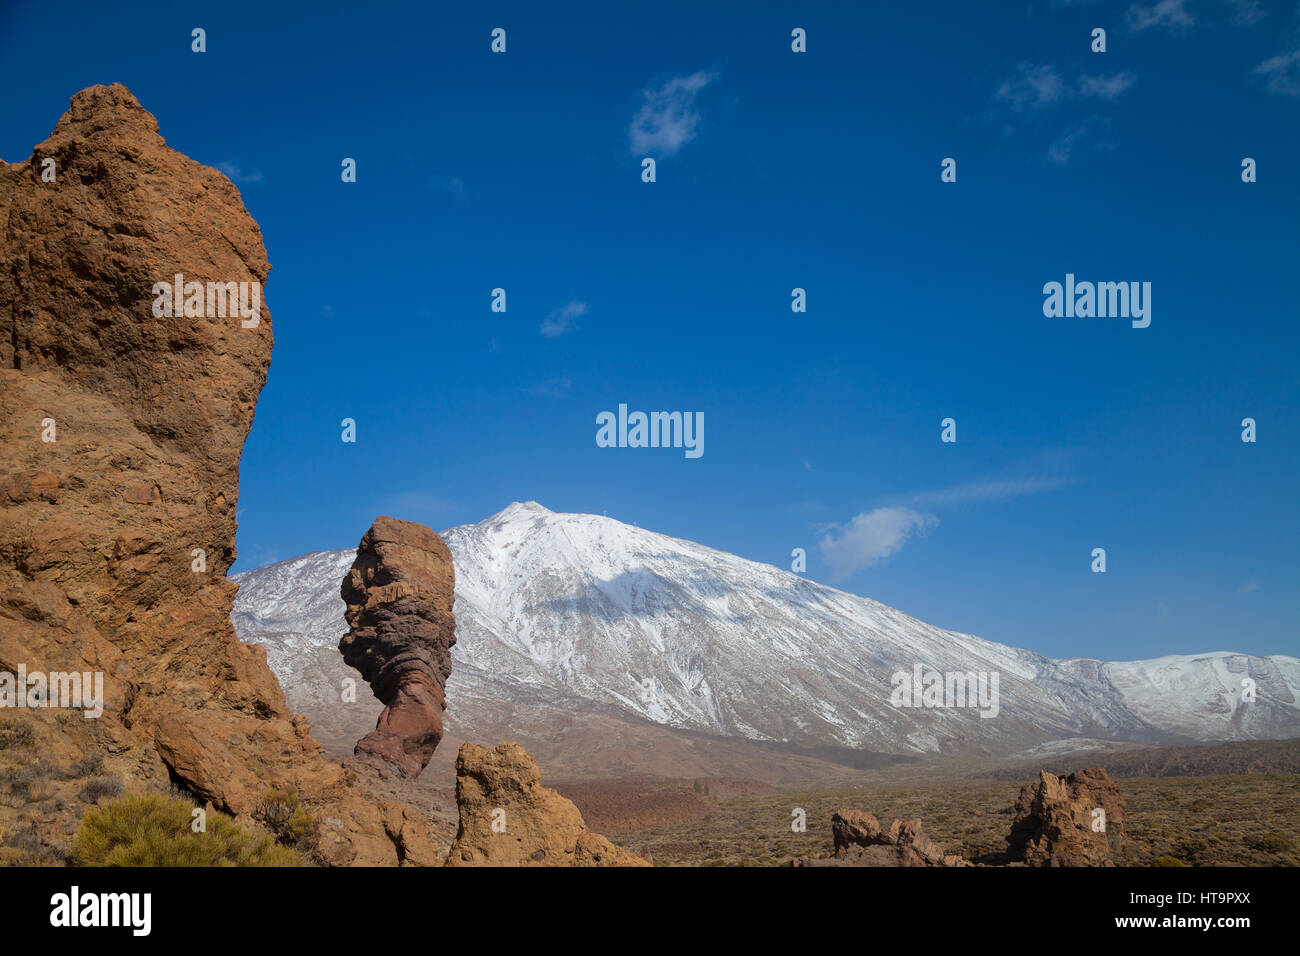 Looking towards the summit of El Teide Volcano on Tenerife with the Los Roques de Garcia in the foreground. Stock Photo